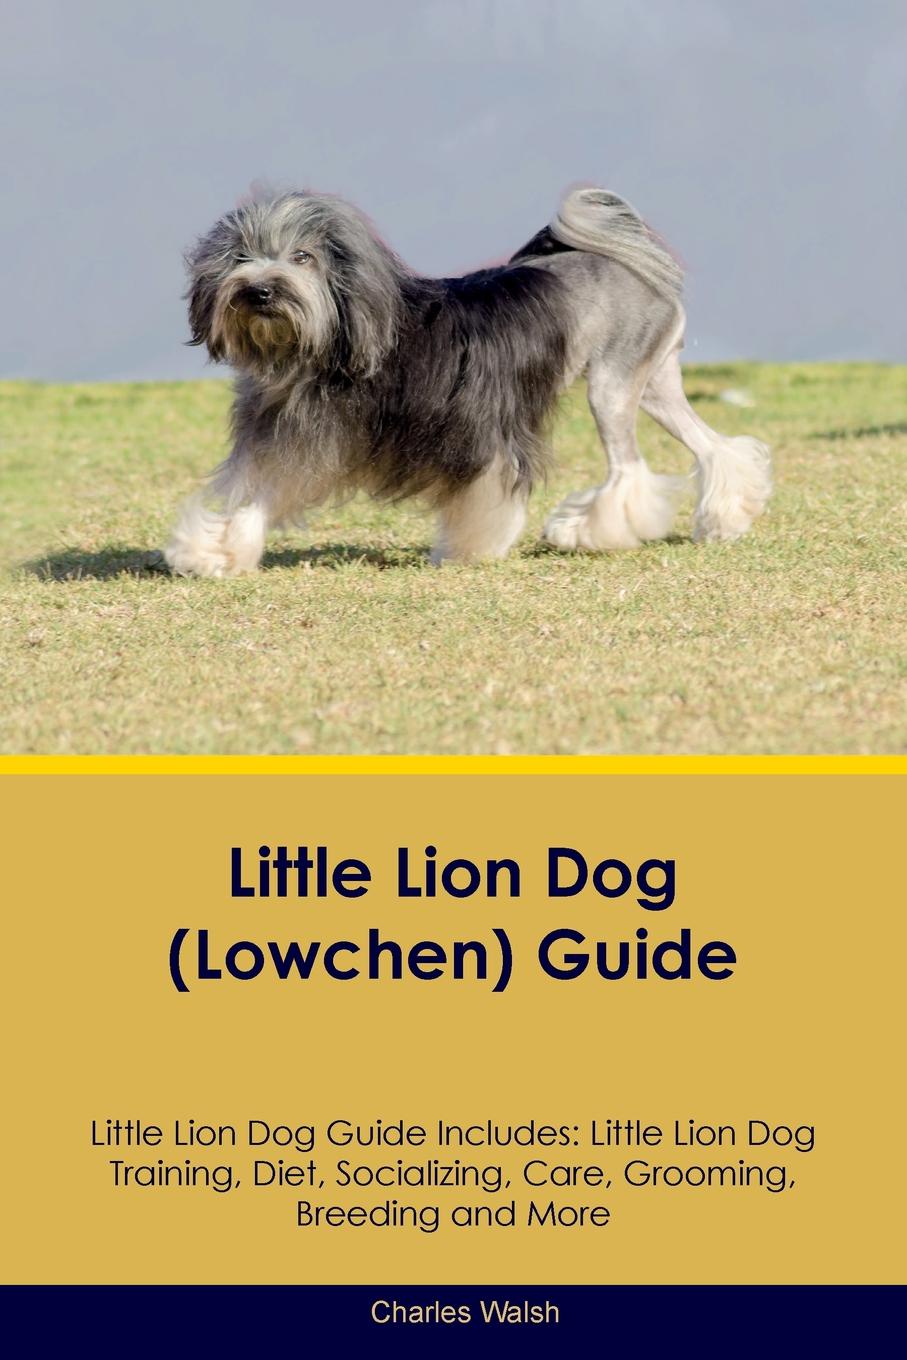 Little Lion Dog (Lowchen) Guide Little Lion Dog Guide Includes. Little Lion Dog Training, Diet, Socializing, Care, Grooming, Breeding and More